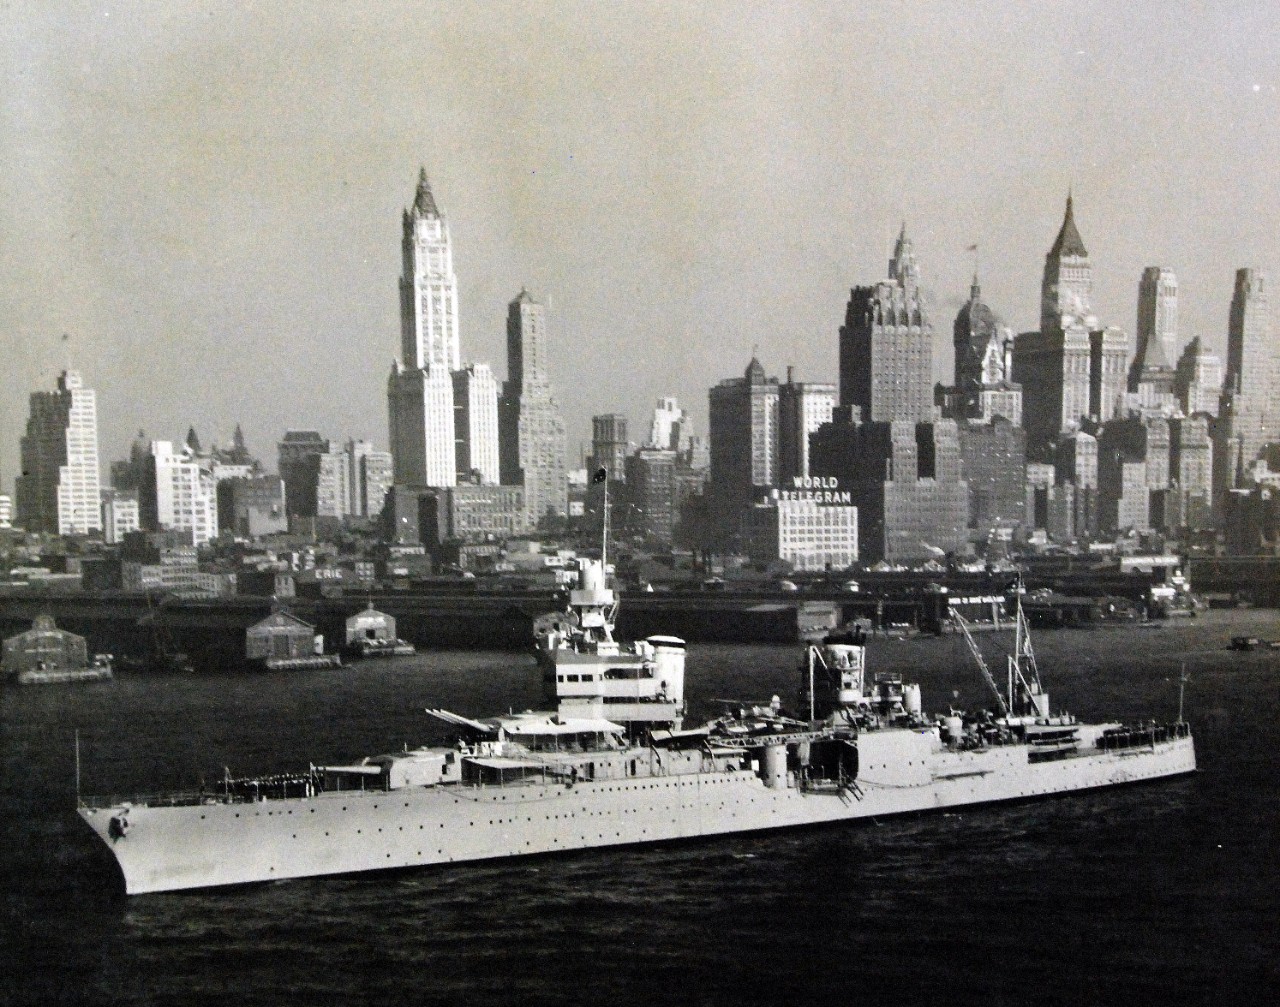 80-G-463063:  USS Indianapolis (CA-35), 1934.   Indianapolis entering the Hudson River, New York City, New York, May 31, 1934.  Official U.S. Navy Photograph, now in the collections of the National Archives .   (2015/4/14).  